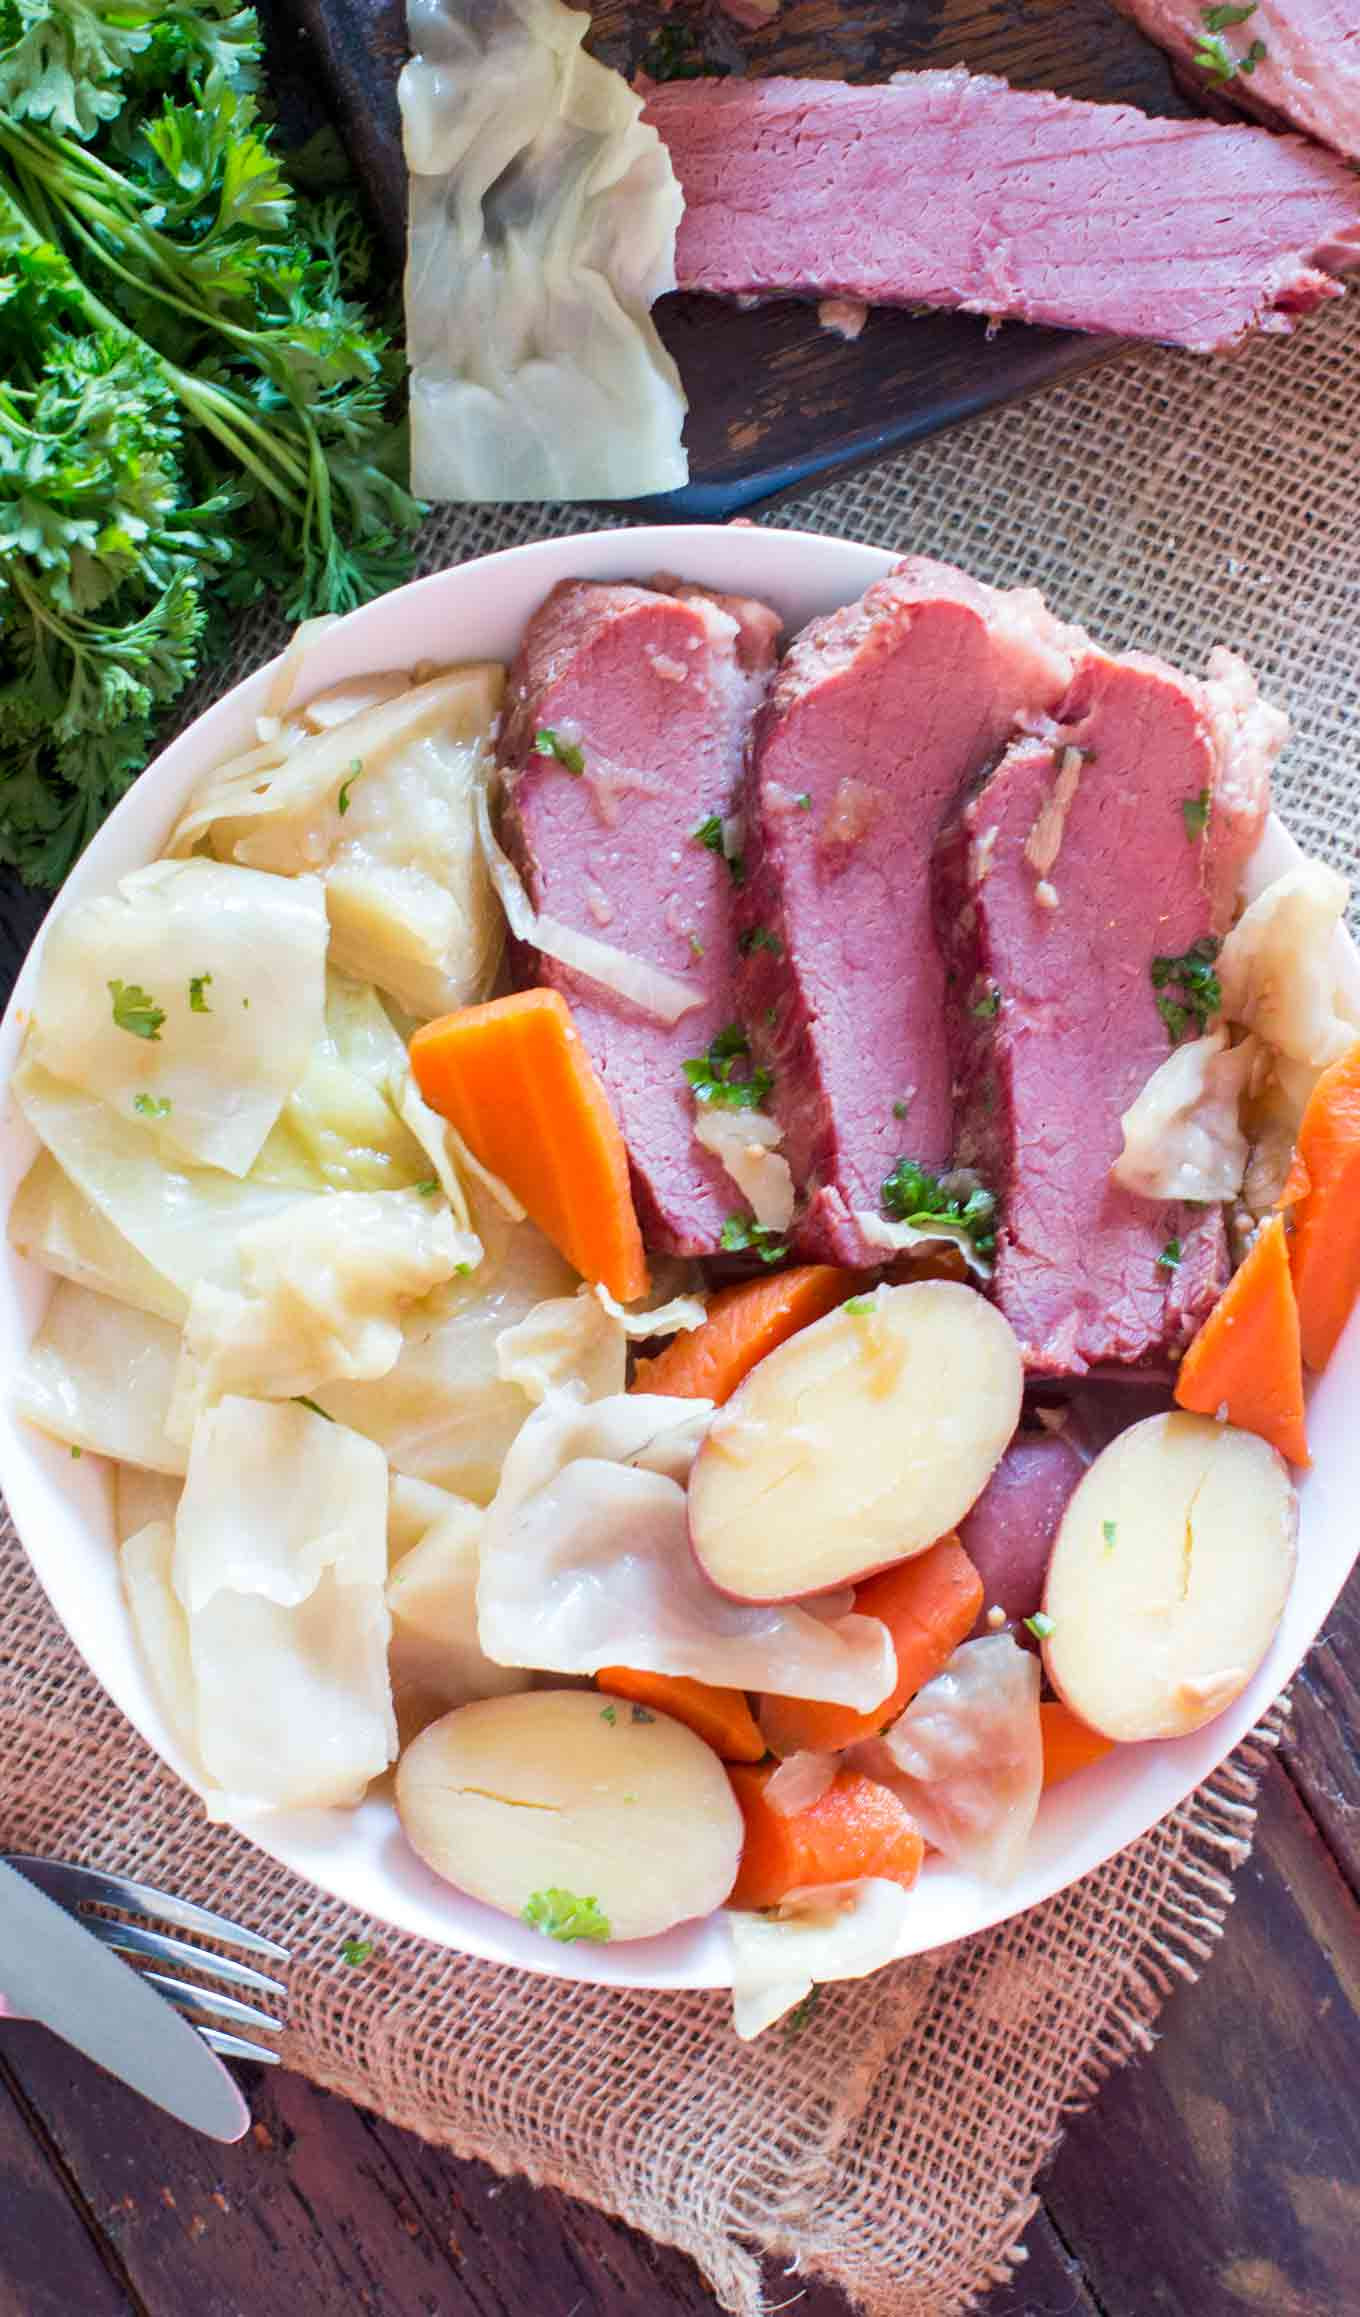 Corned Beef And Cabbage In Instant Pot
 Instant Pot Corned Beef and Cabbage [VIDEO] Sweet and